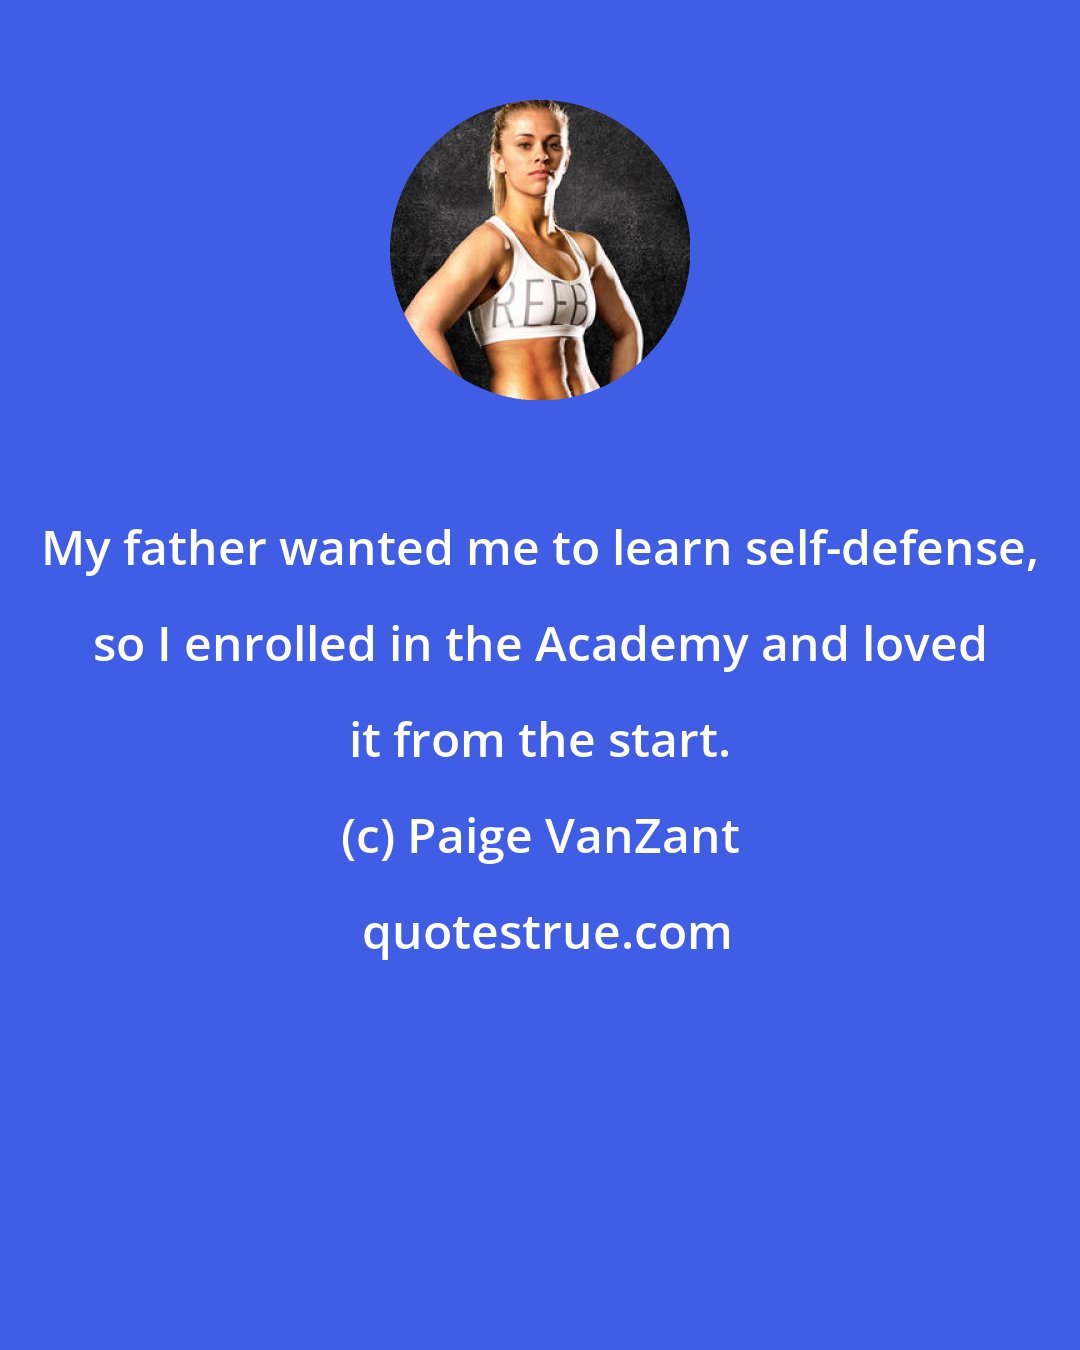 Paige VanZant: My father wanted me to learn self-defense, so I enrolled in the Academy and loved it from the start.